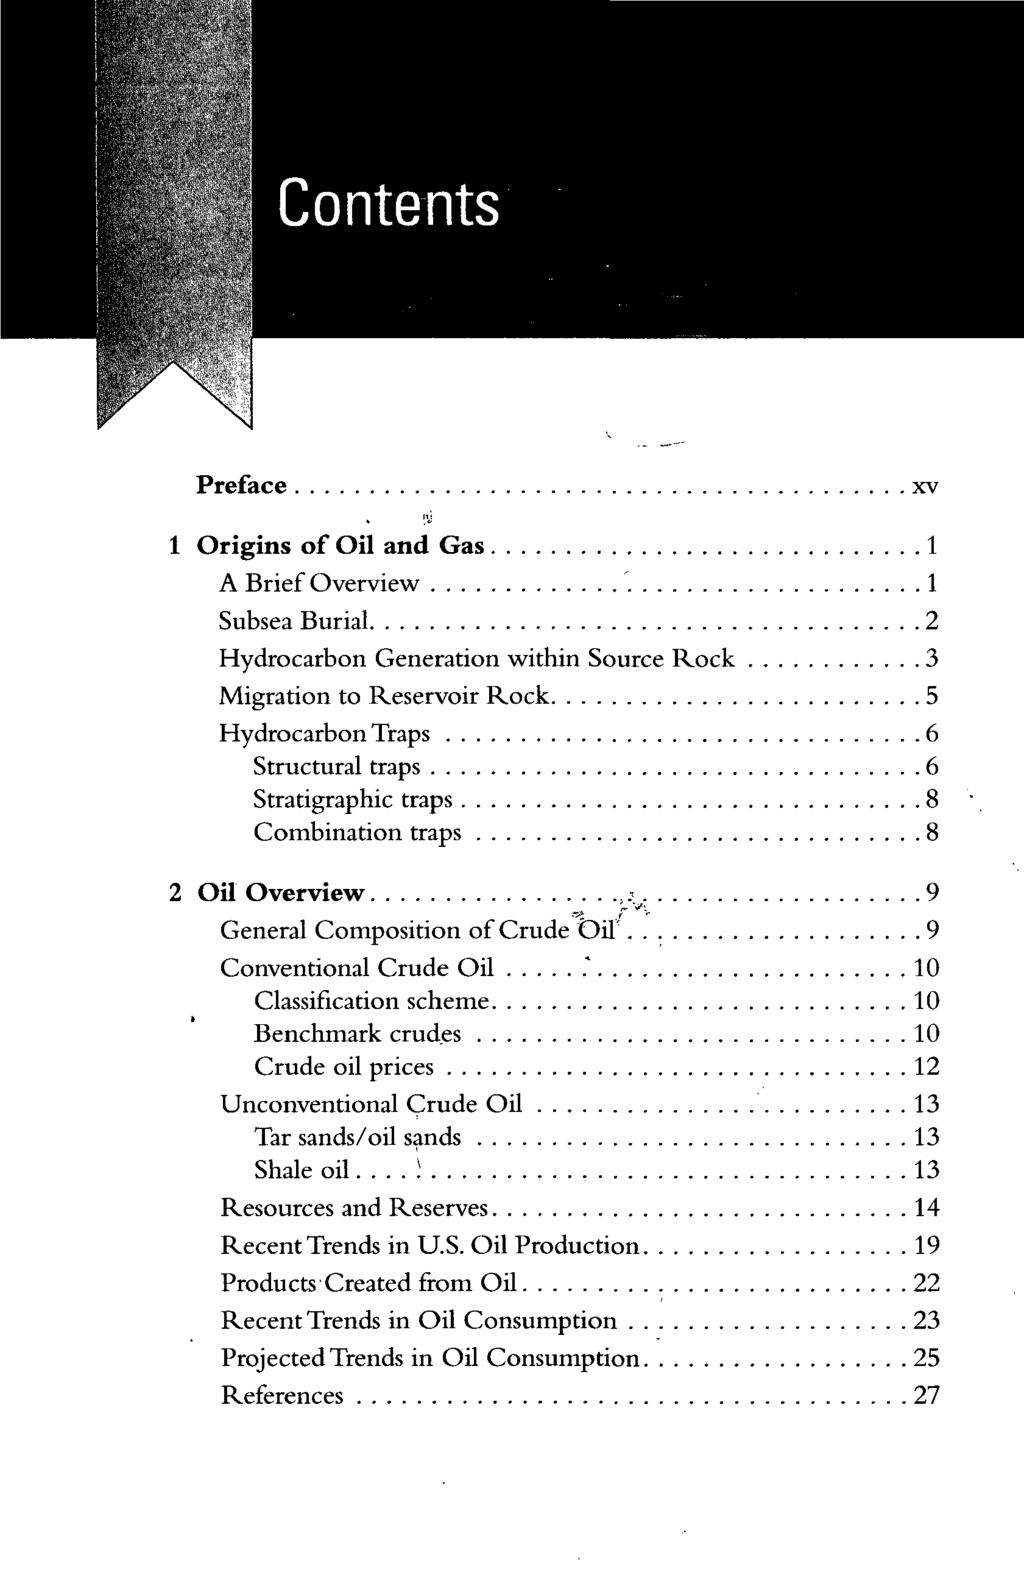 Contents Preface xv 1 Origins of Oil and Gas 1 A Brief Overview 1 Subsea Burial 2 Hydrocarbon Generation within Source Rock 3 Migration to Reservoir Rock 5 Hydrocarbon Traps 6 Structural traps 6